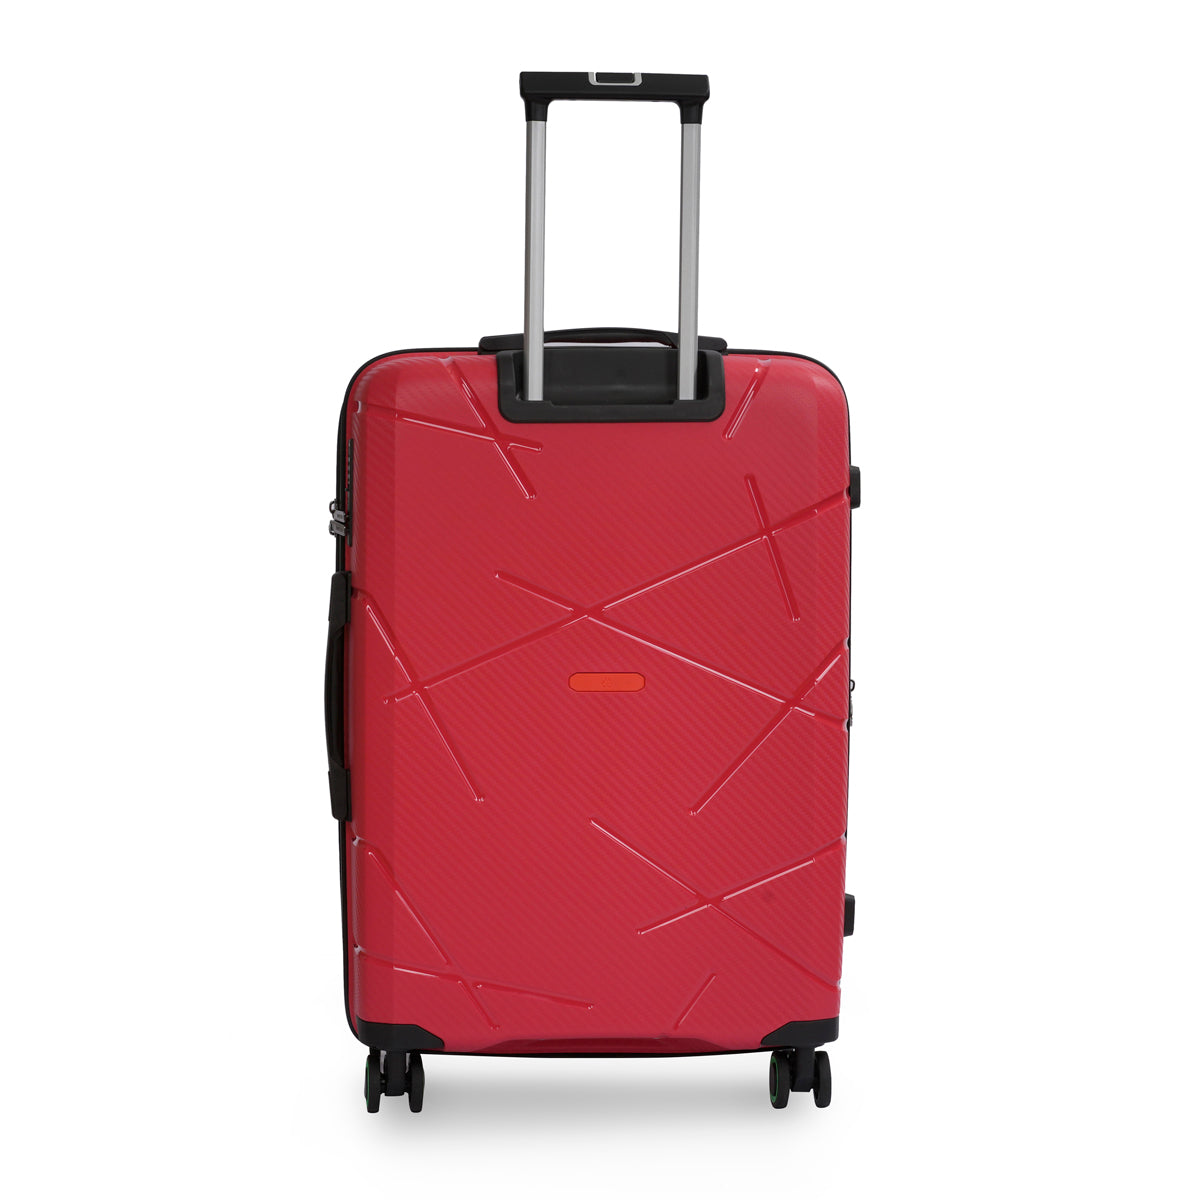 United Colors of Benetton Moonstone Hard Luggage Red